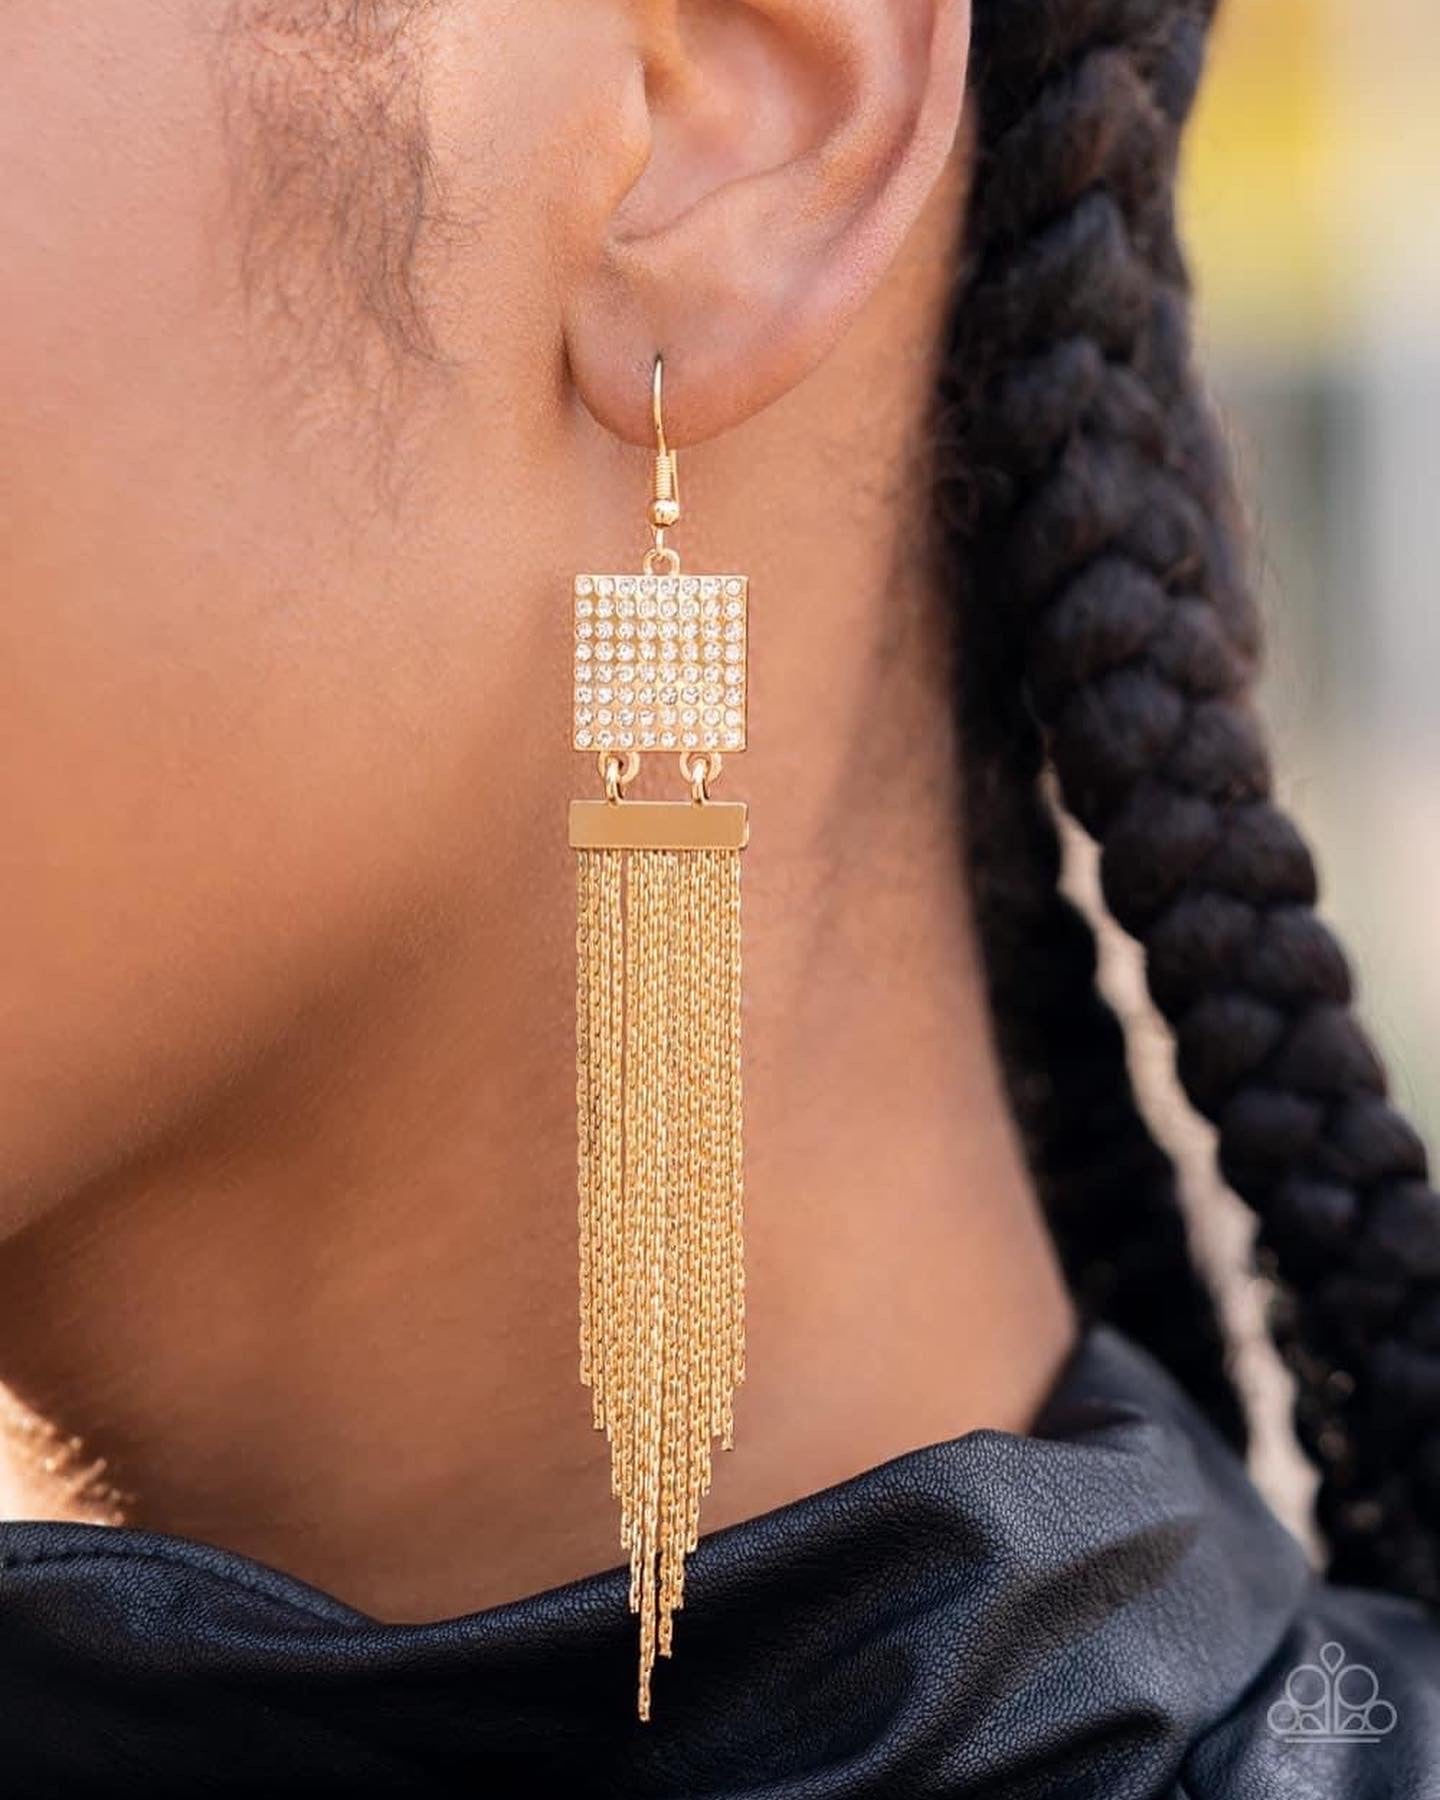 Dramatically Deco Gold-Earrings